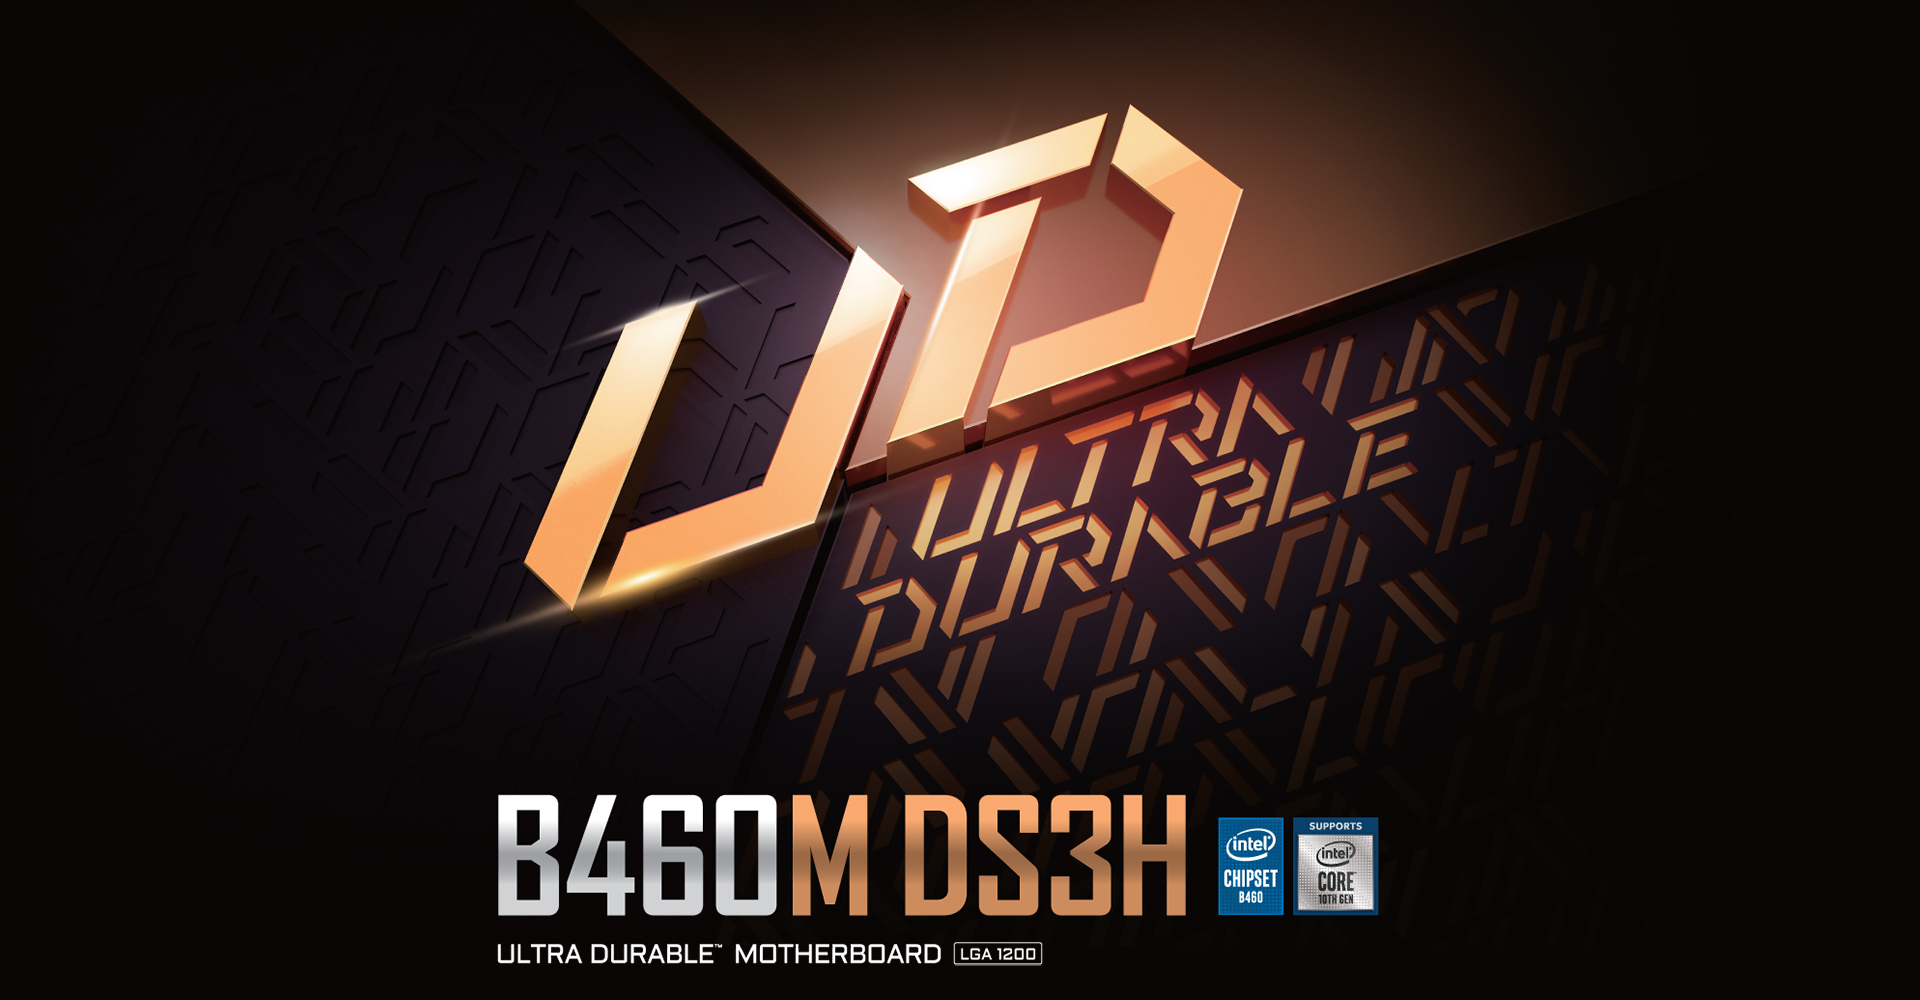 B460M DS3H (rev. 1.0) Key Features | Motherboard - GIGABYTE Global